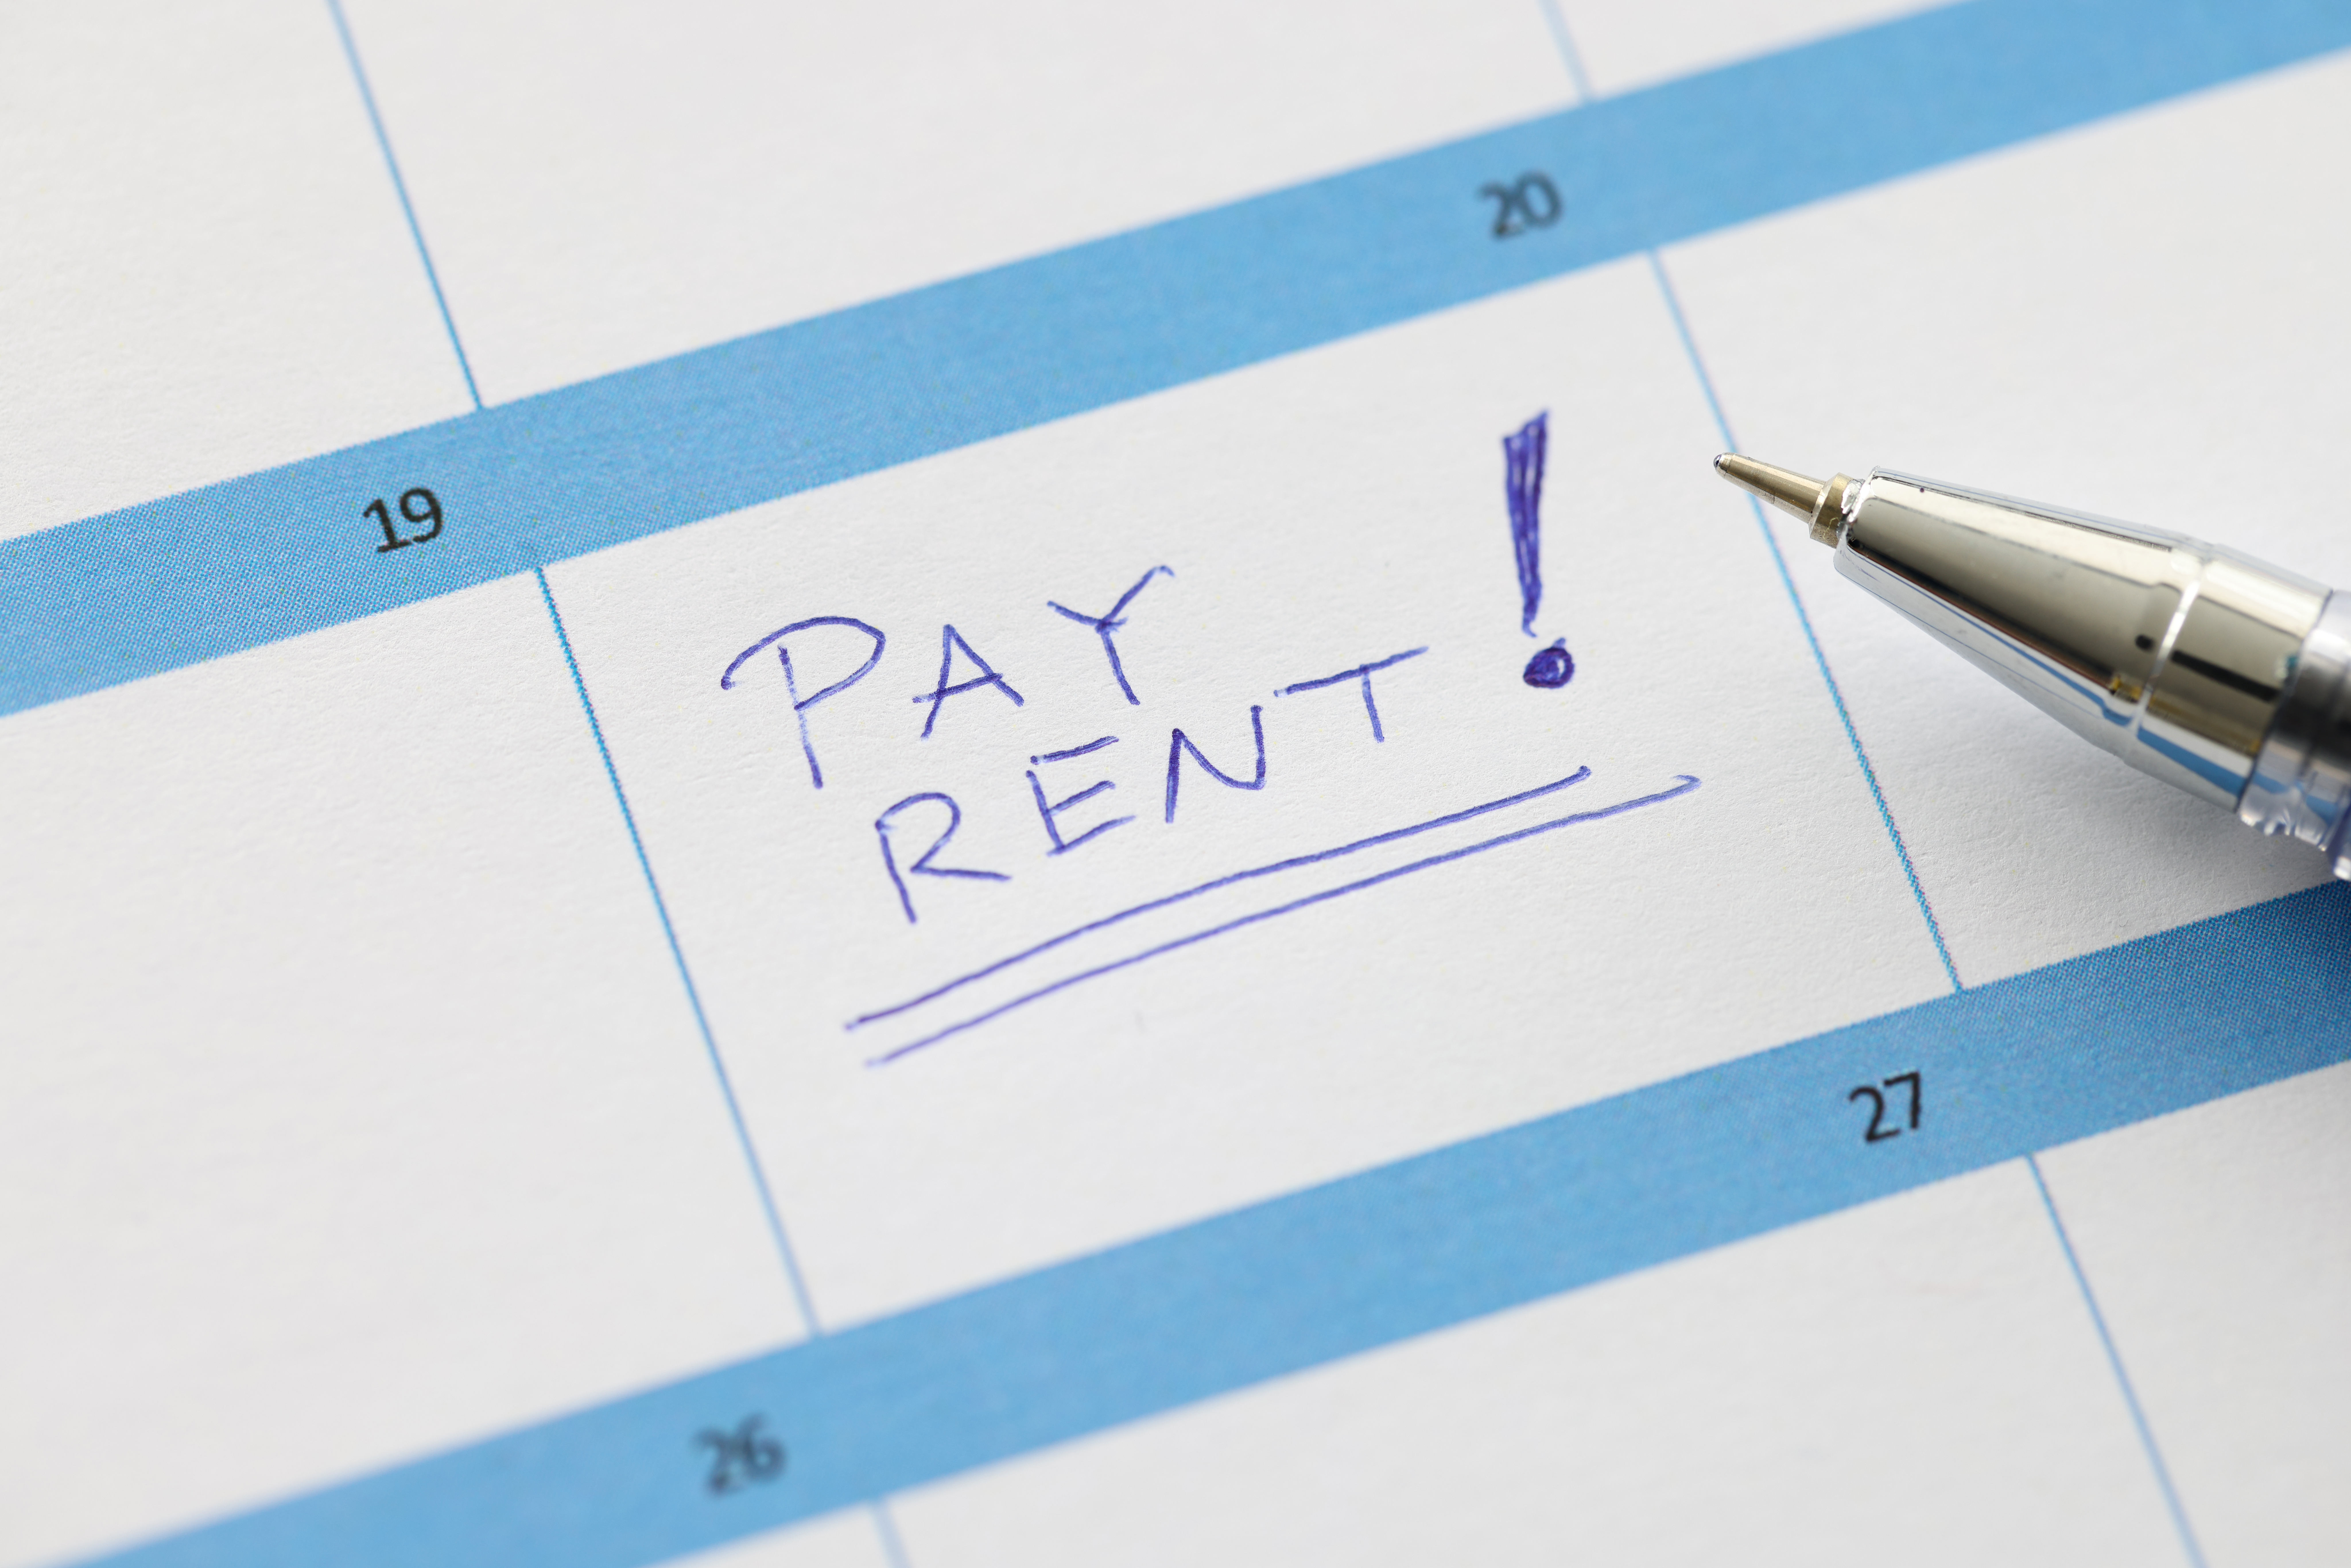 How Much Is My Landlord Allowed To Increase My Rent By In A Single Year?